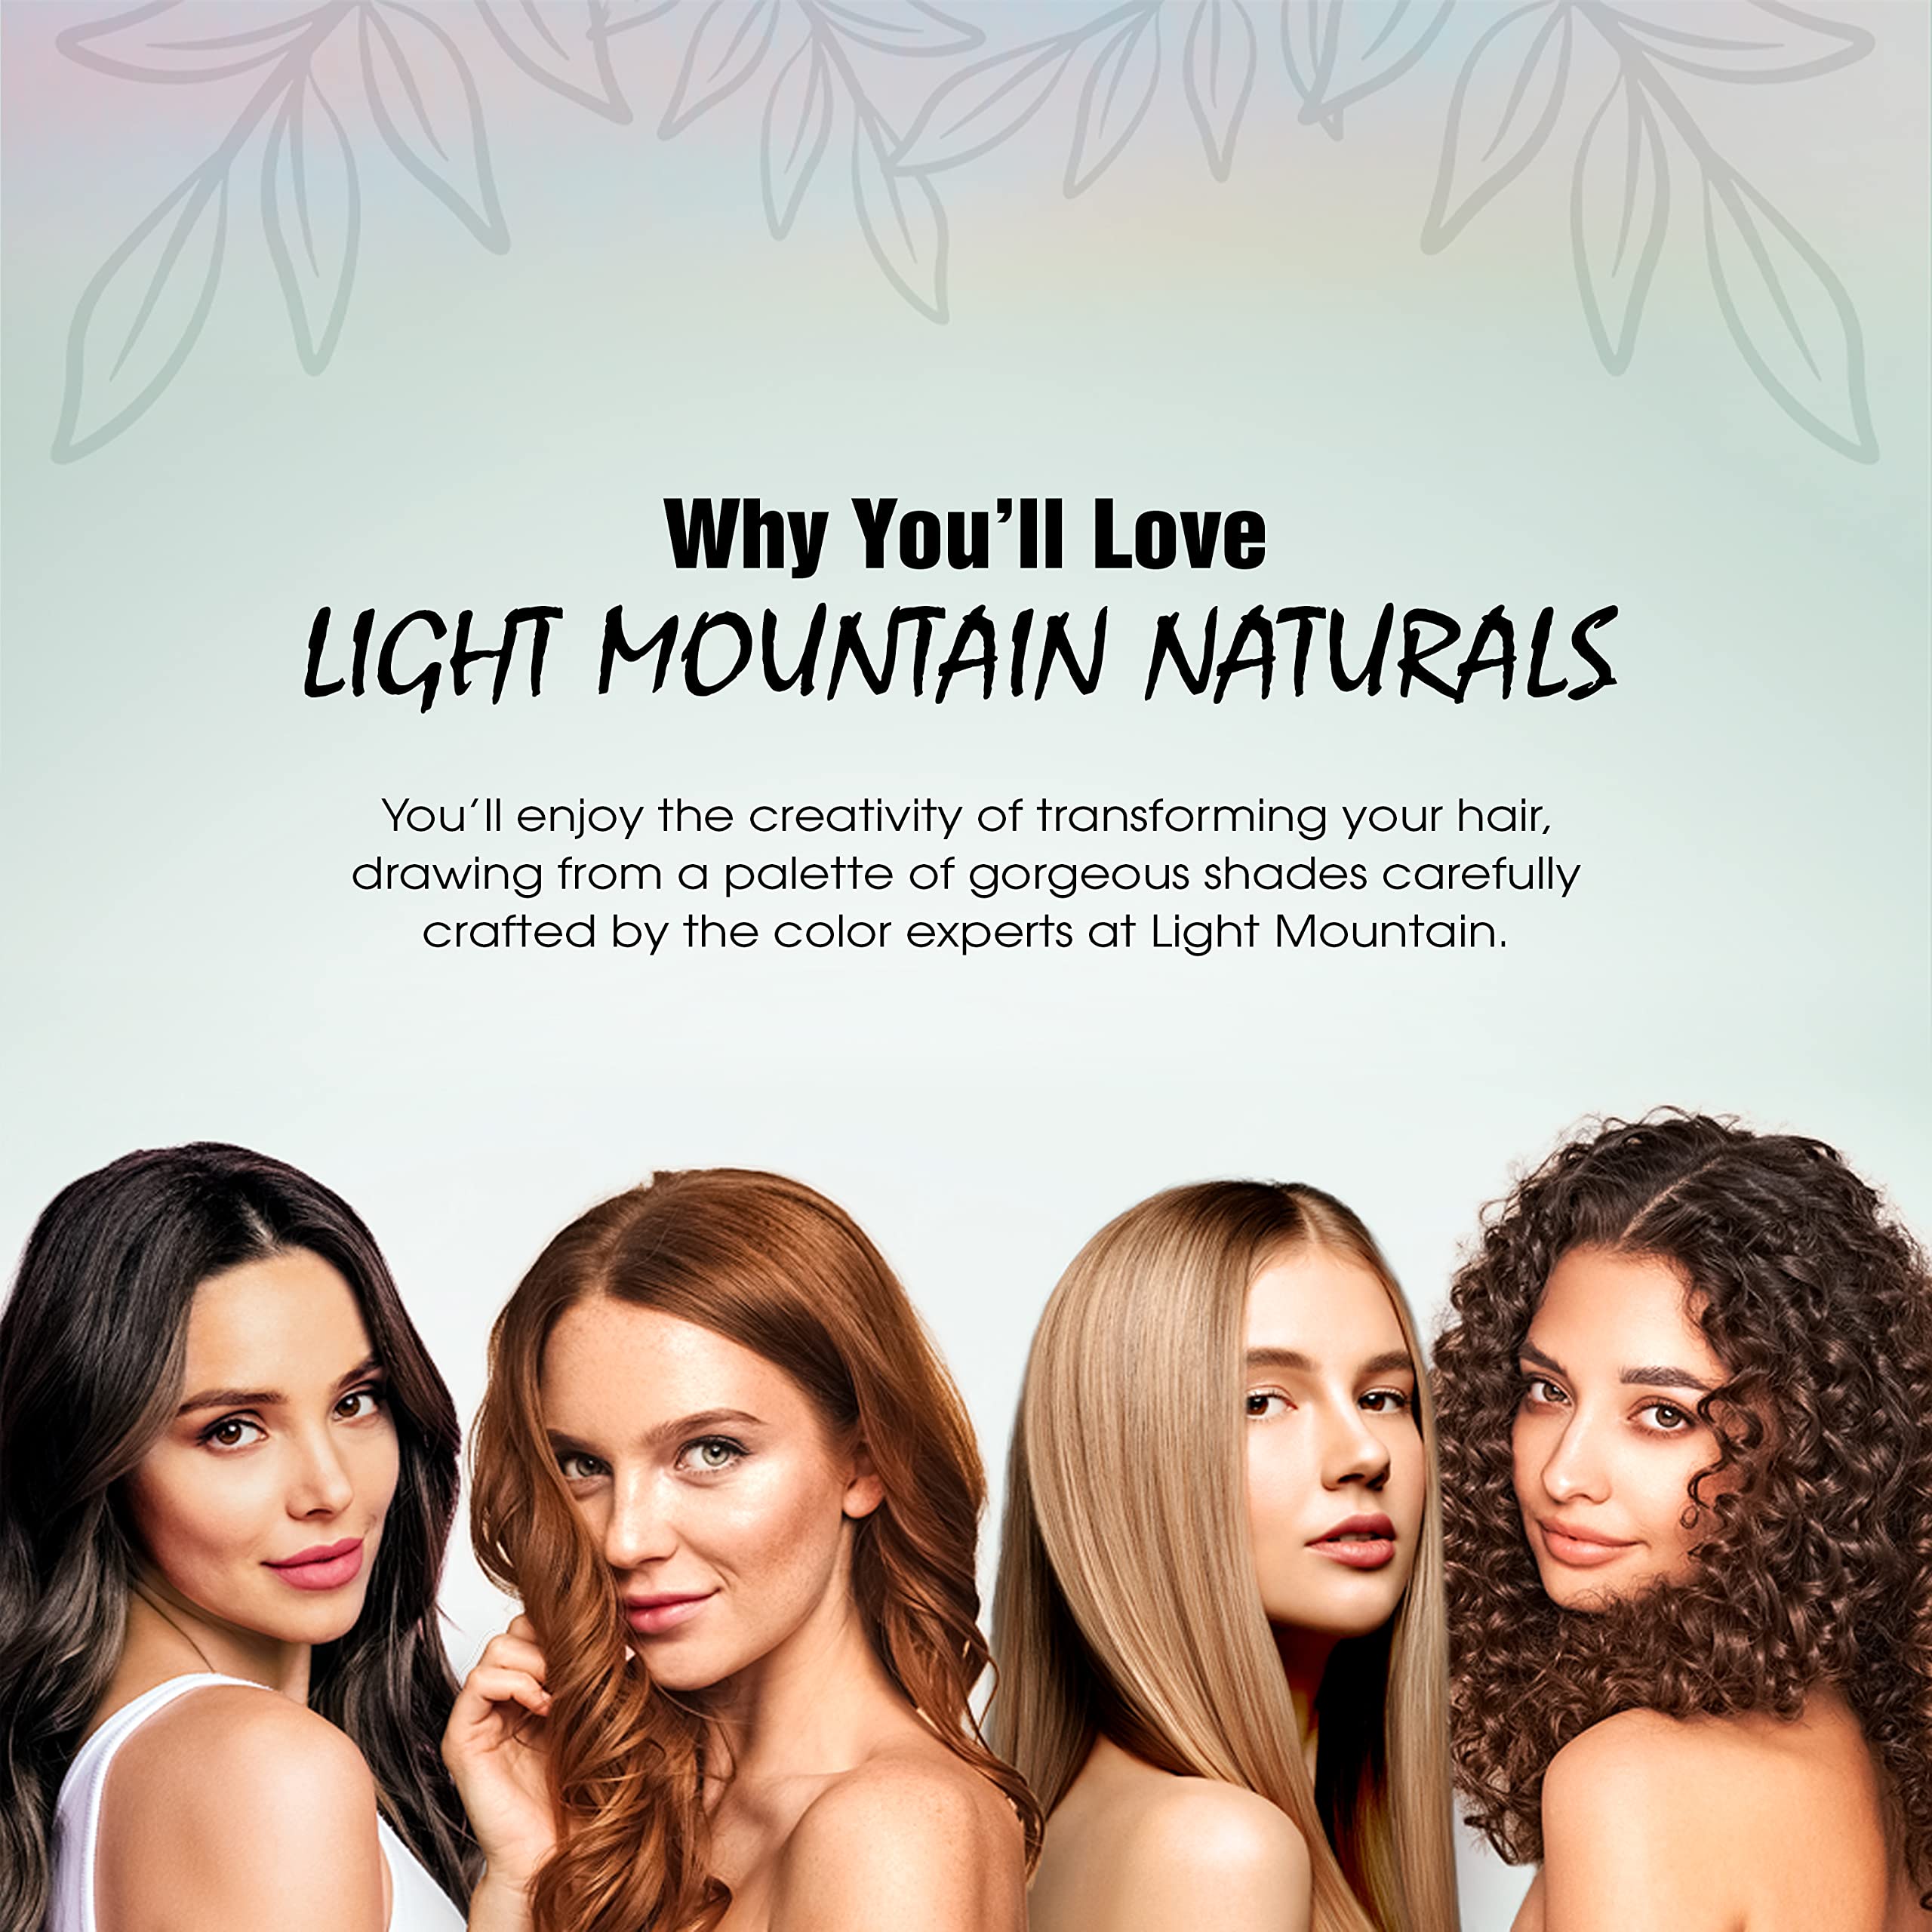 Light Mountain Henna Hair Color & Conditioner - Bright Red Hair Dye for Men/Women, Organic Henna Leaf Powder and Botanicals, Chemical-Free, Semi-Permanent Hair Color, 4 Oz  